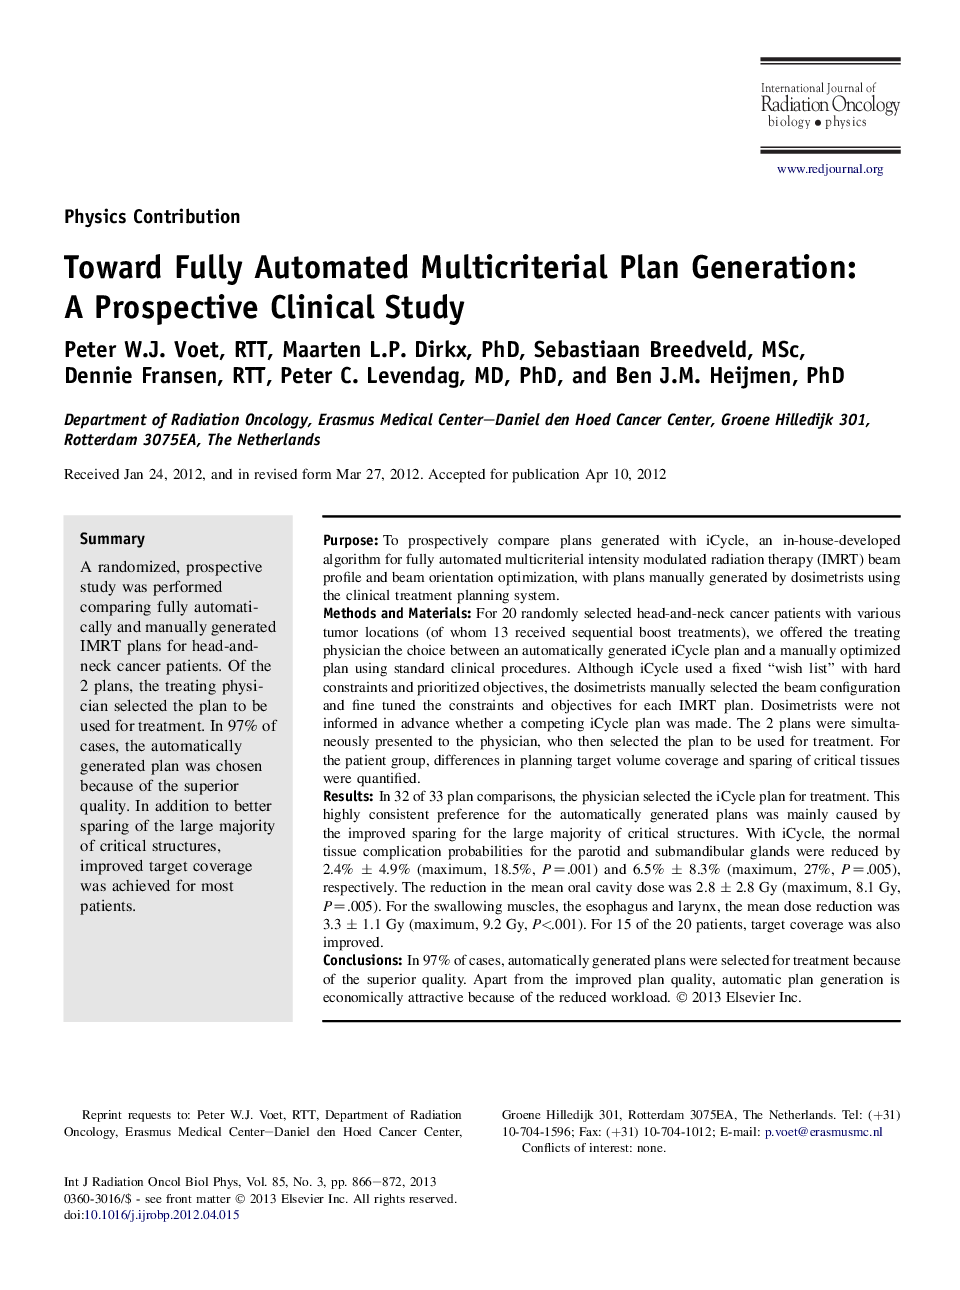 Toward Fully Automated Multicriterial Plan Generation: A Prospective Clinical Study